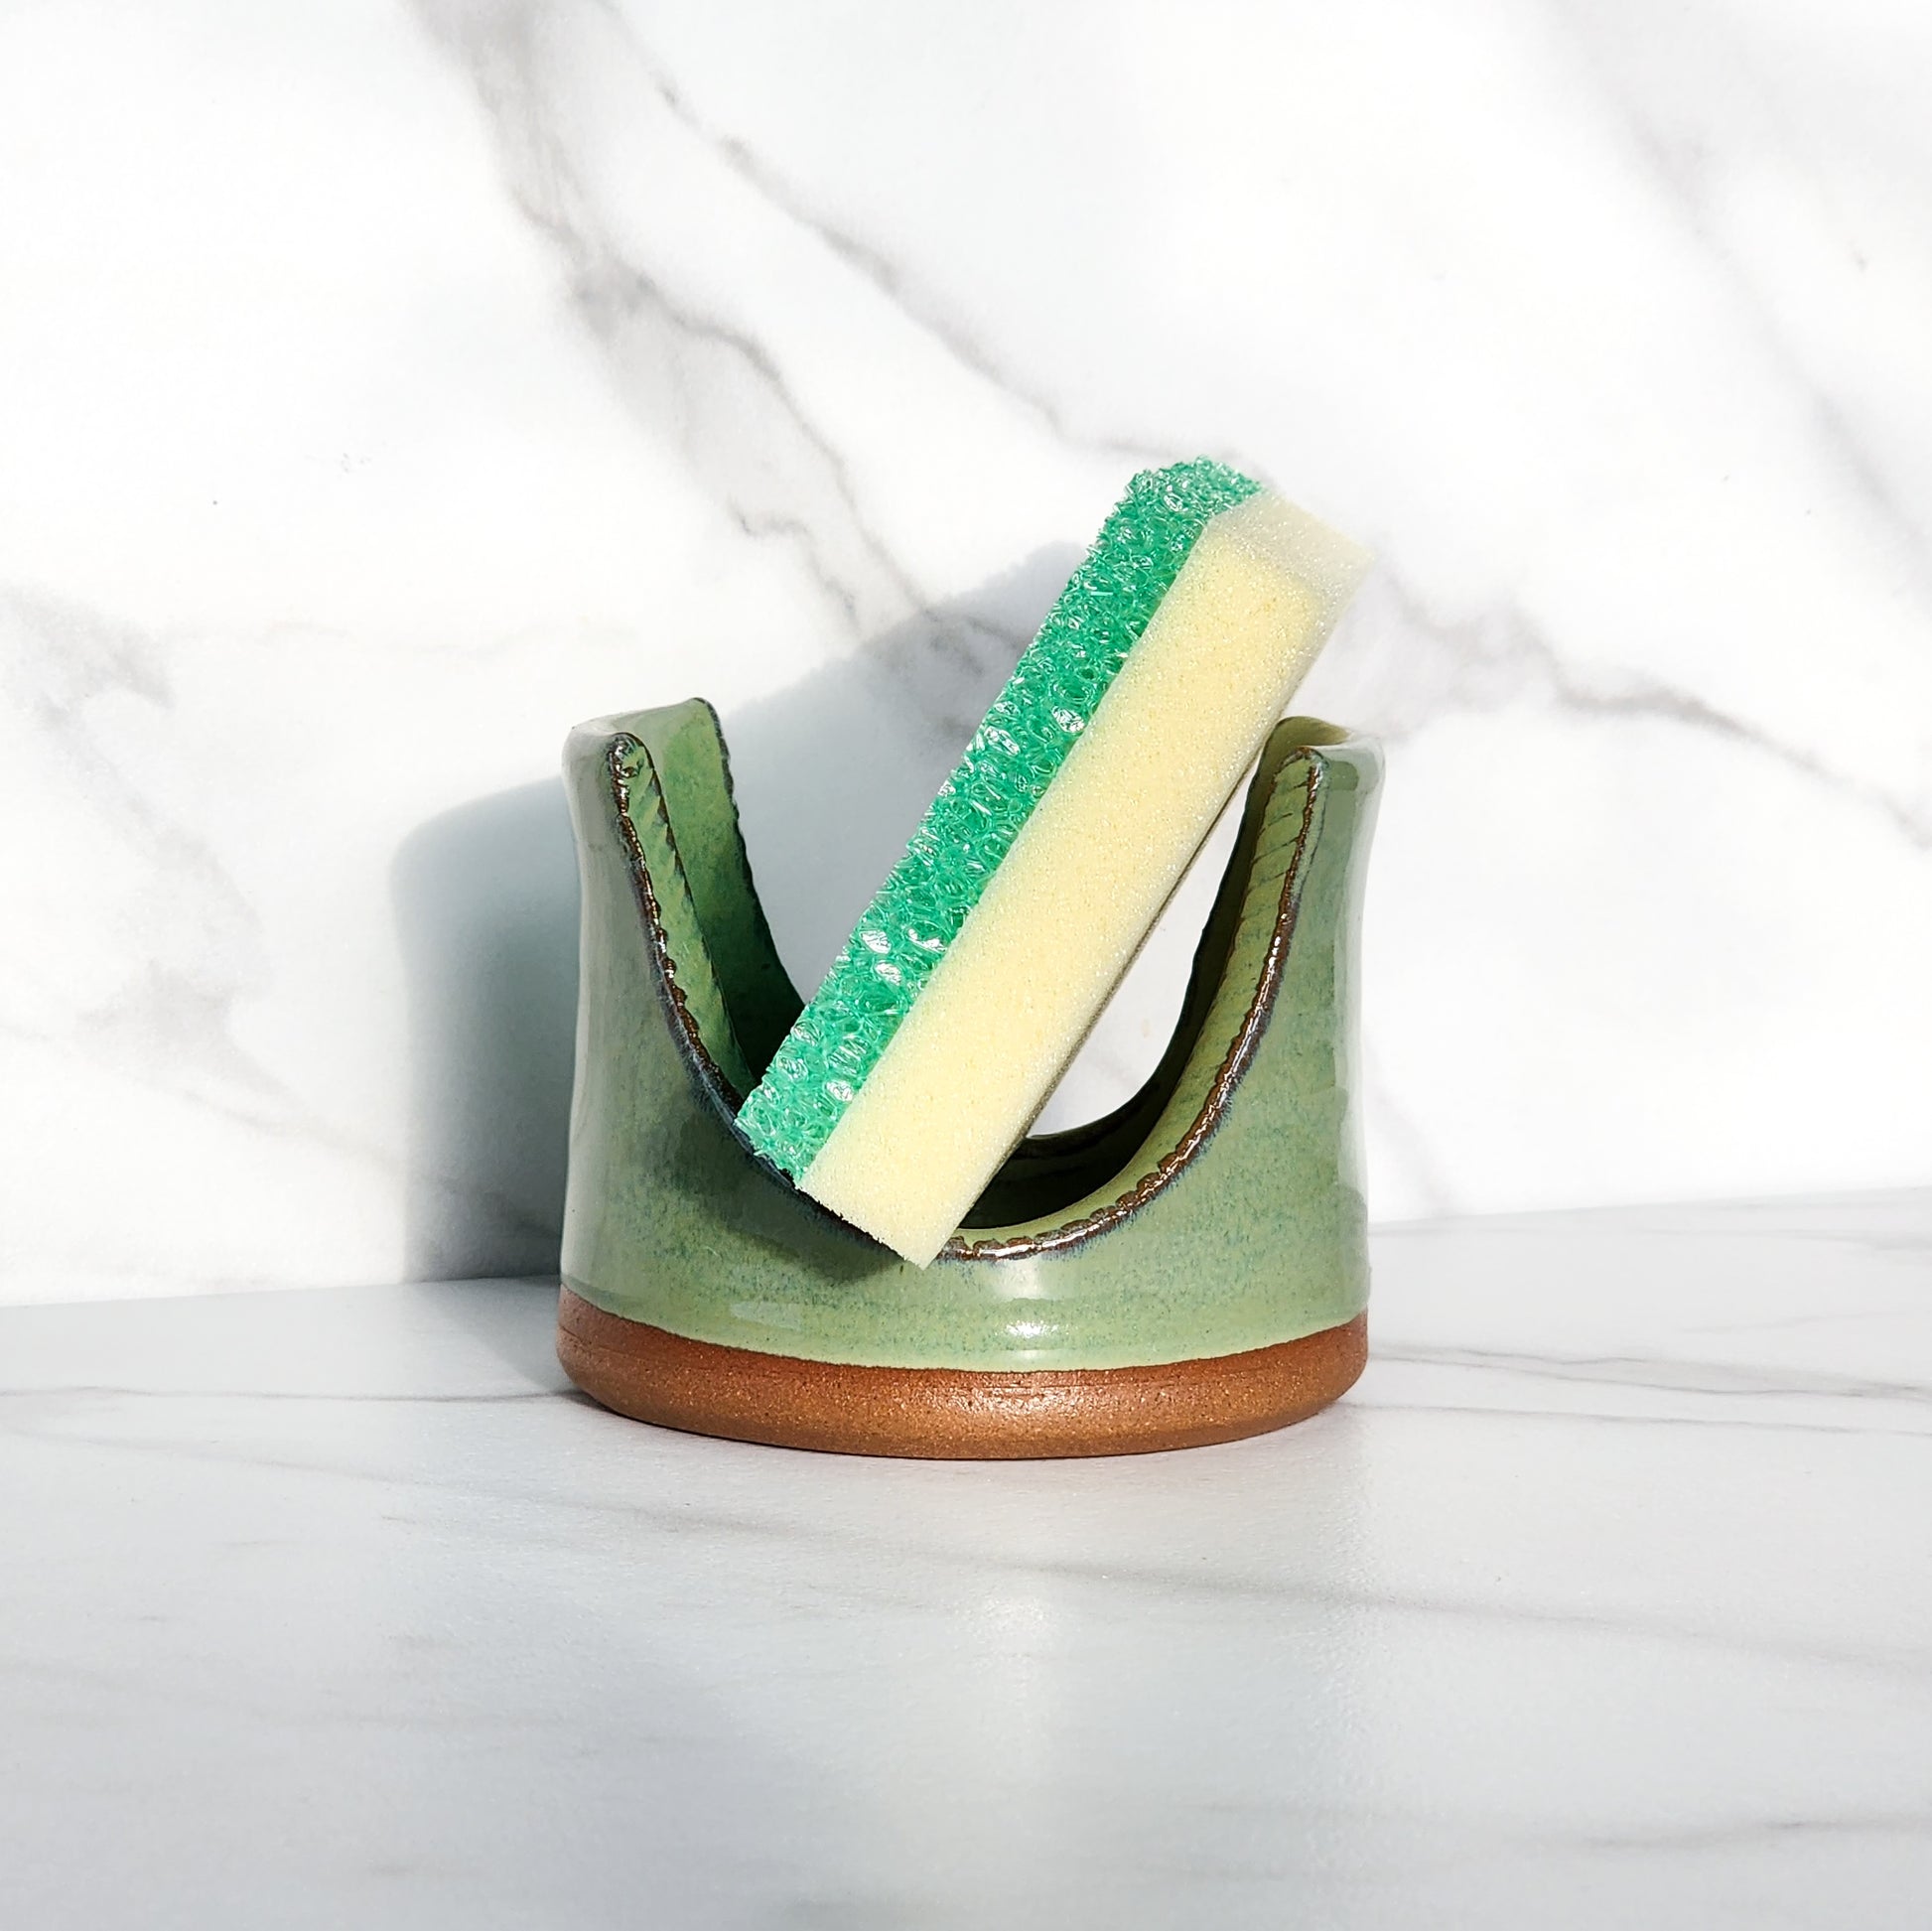 Image: Clinton Pottery's Handmade Sponge Holder in Bud Green – A visually appealing and practical kitchen accessory crafted with artisanal expertise. This durable stoneware holder in refreshing Bud Green, reminiscent of spring foliage and new growth, adds a touch of nature's vitality to your kitchen. Designed to hold your sponge securely and prevent water from spreading, it keeps your counters and sink area tidy.